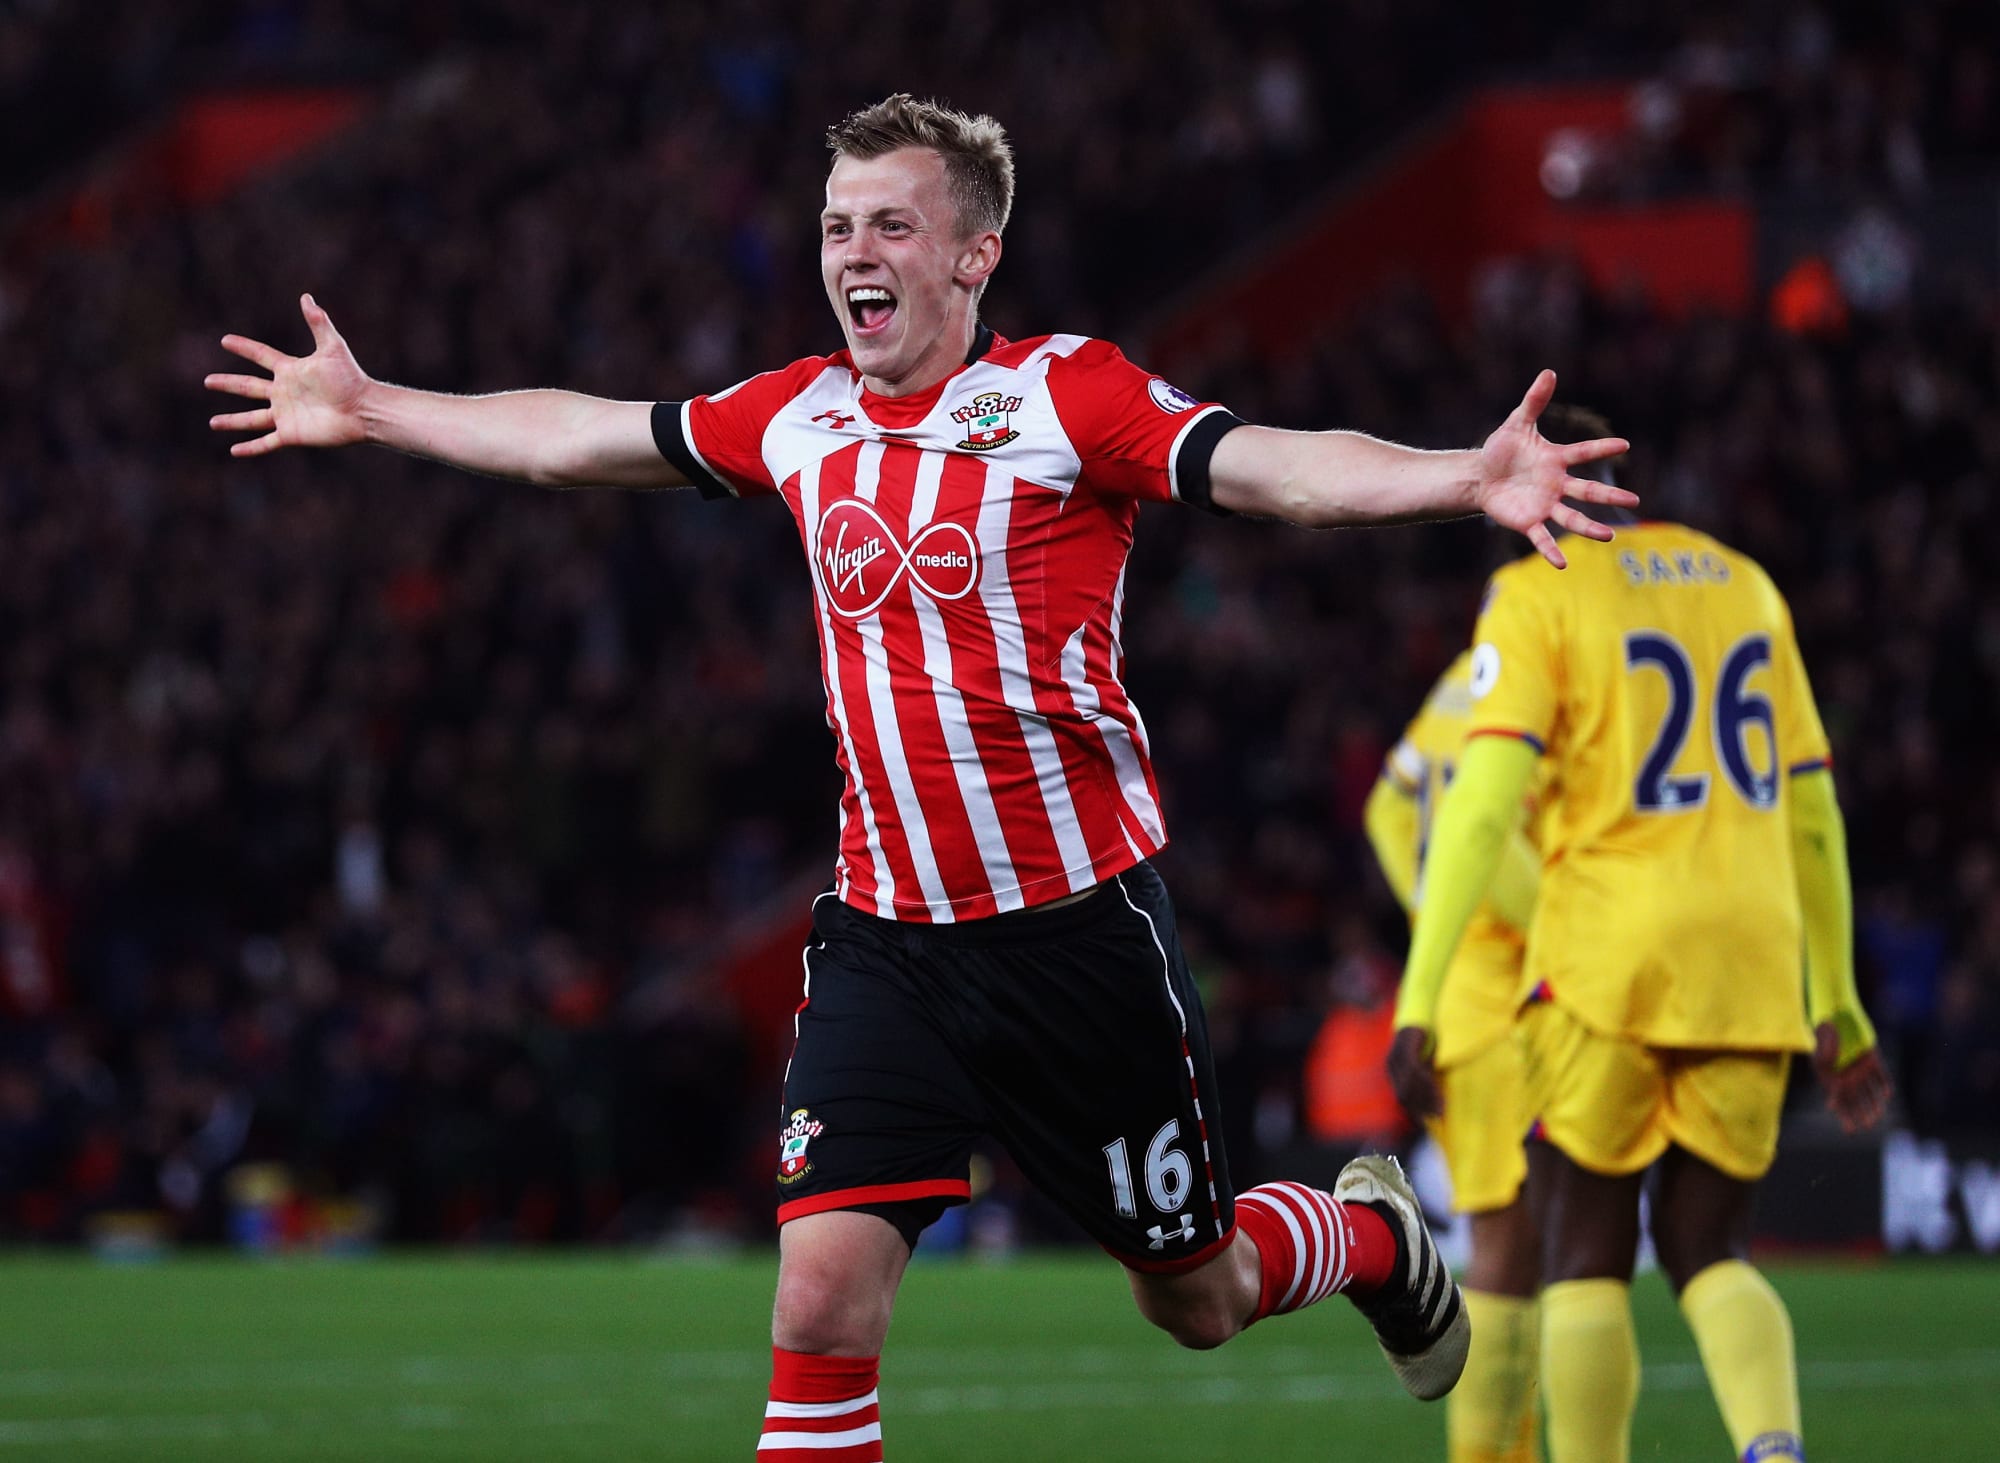 This year is crucial for James Ward-Prowse at Southampton